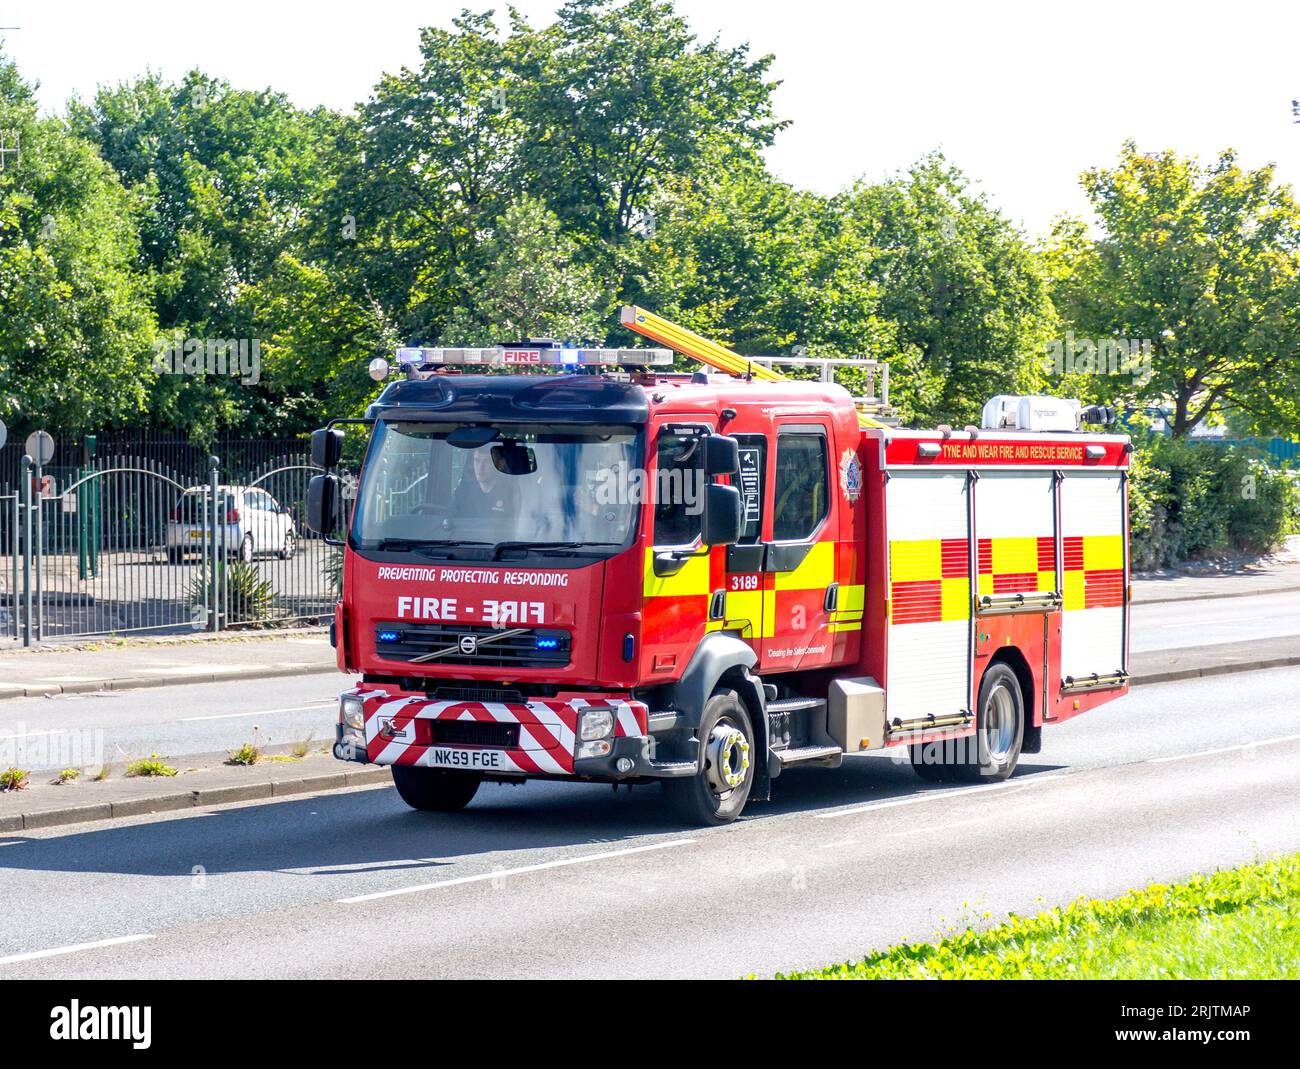 Tyne and Wear fire and rescue truck on call, Park Lane, Gateshead, Tyne and Wear, England, United Kingdom Stock Photo